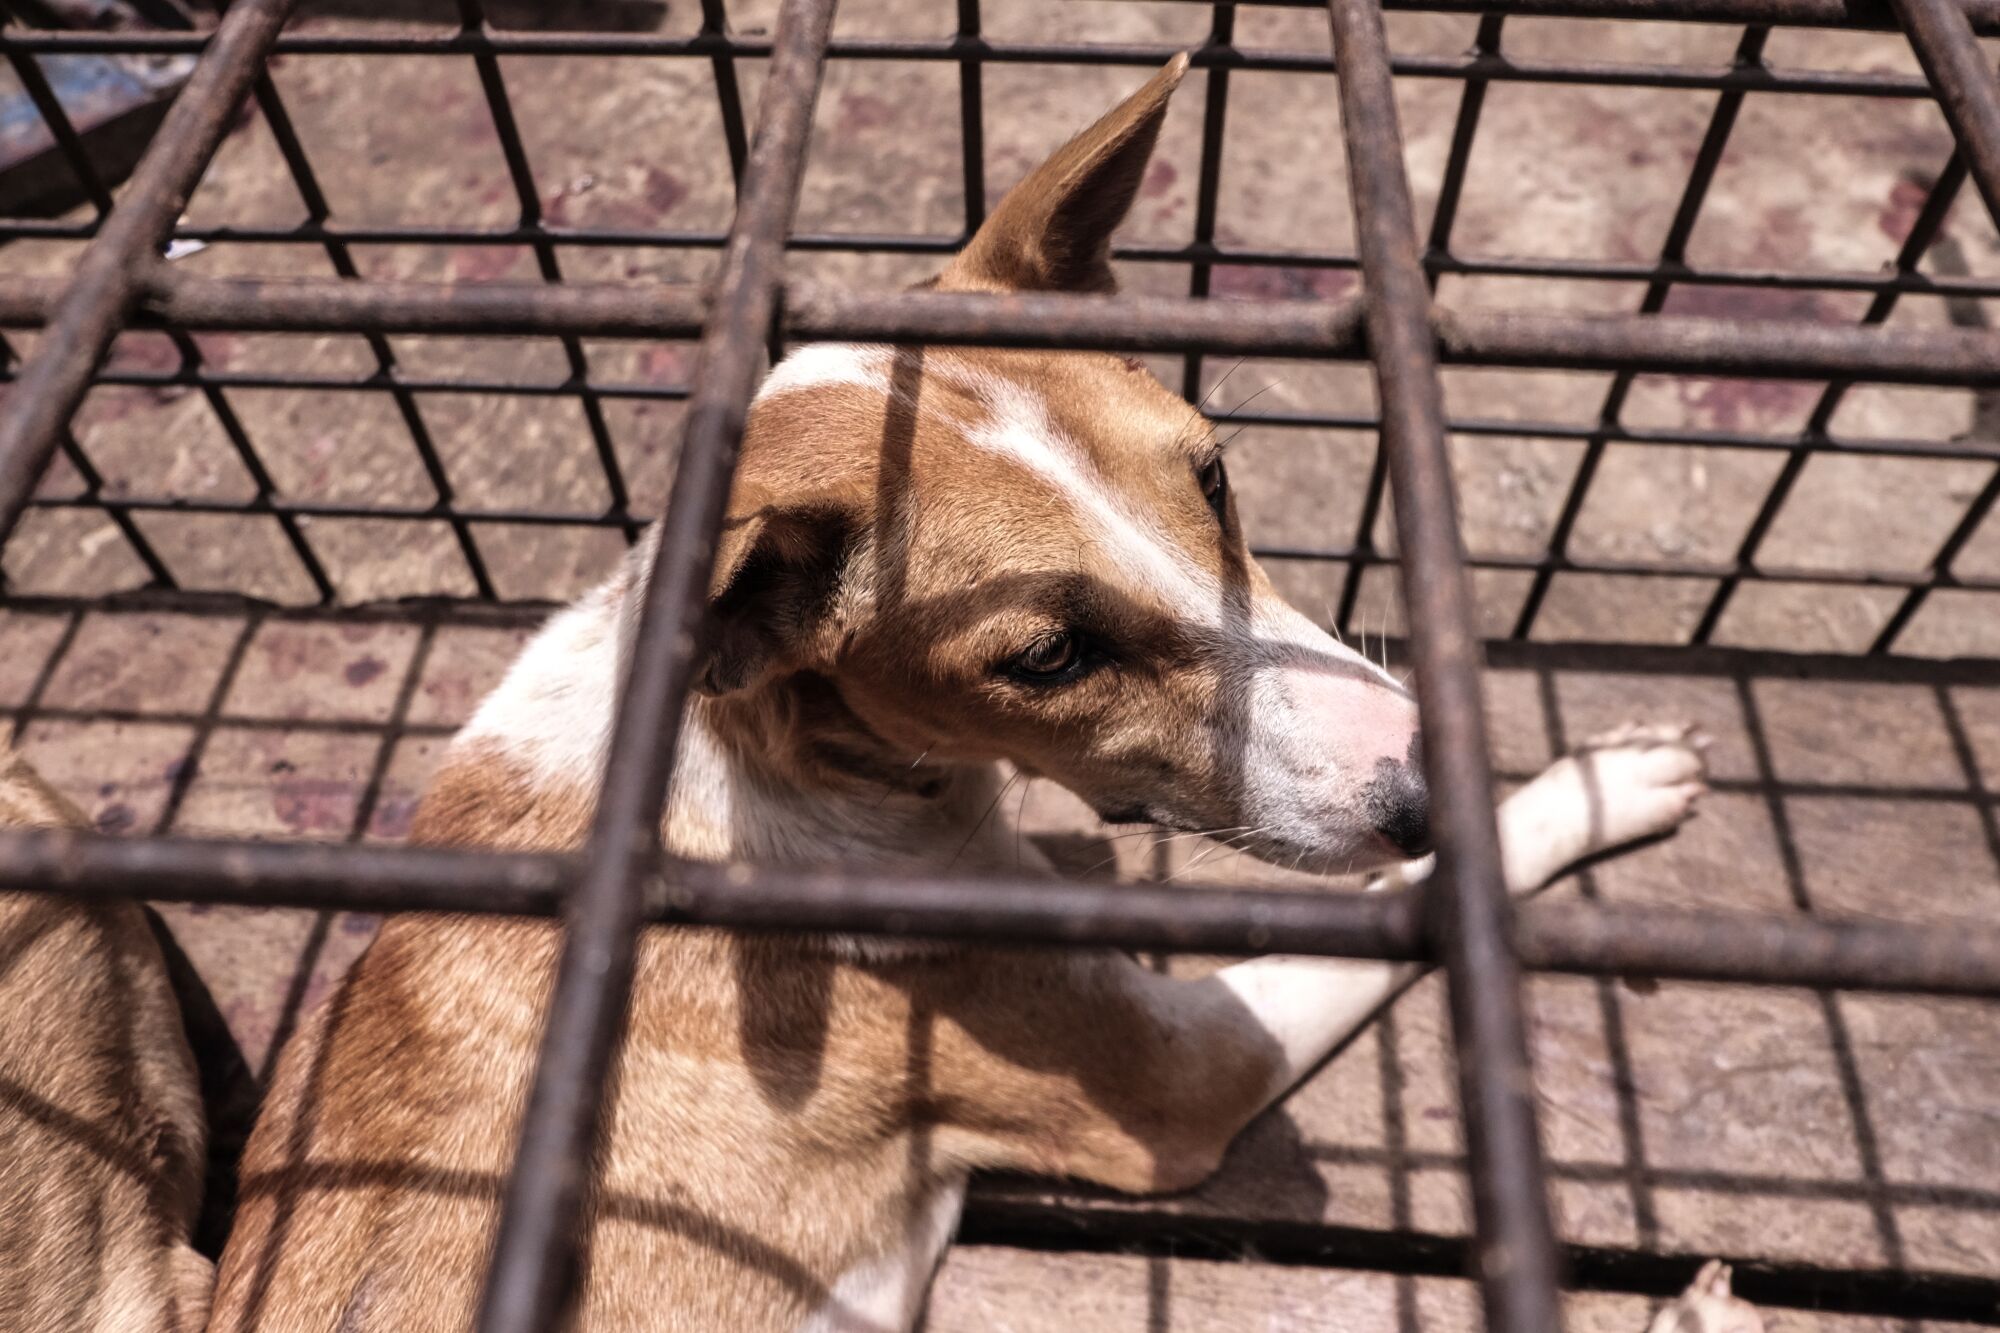 A dog in a cage at the market in Tomohon, Indonesia